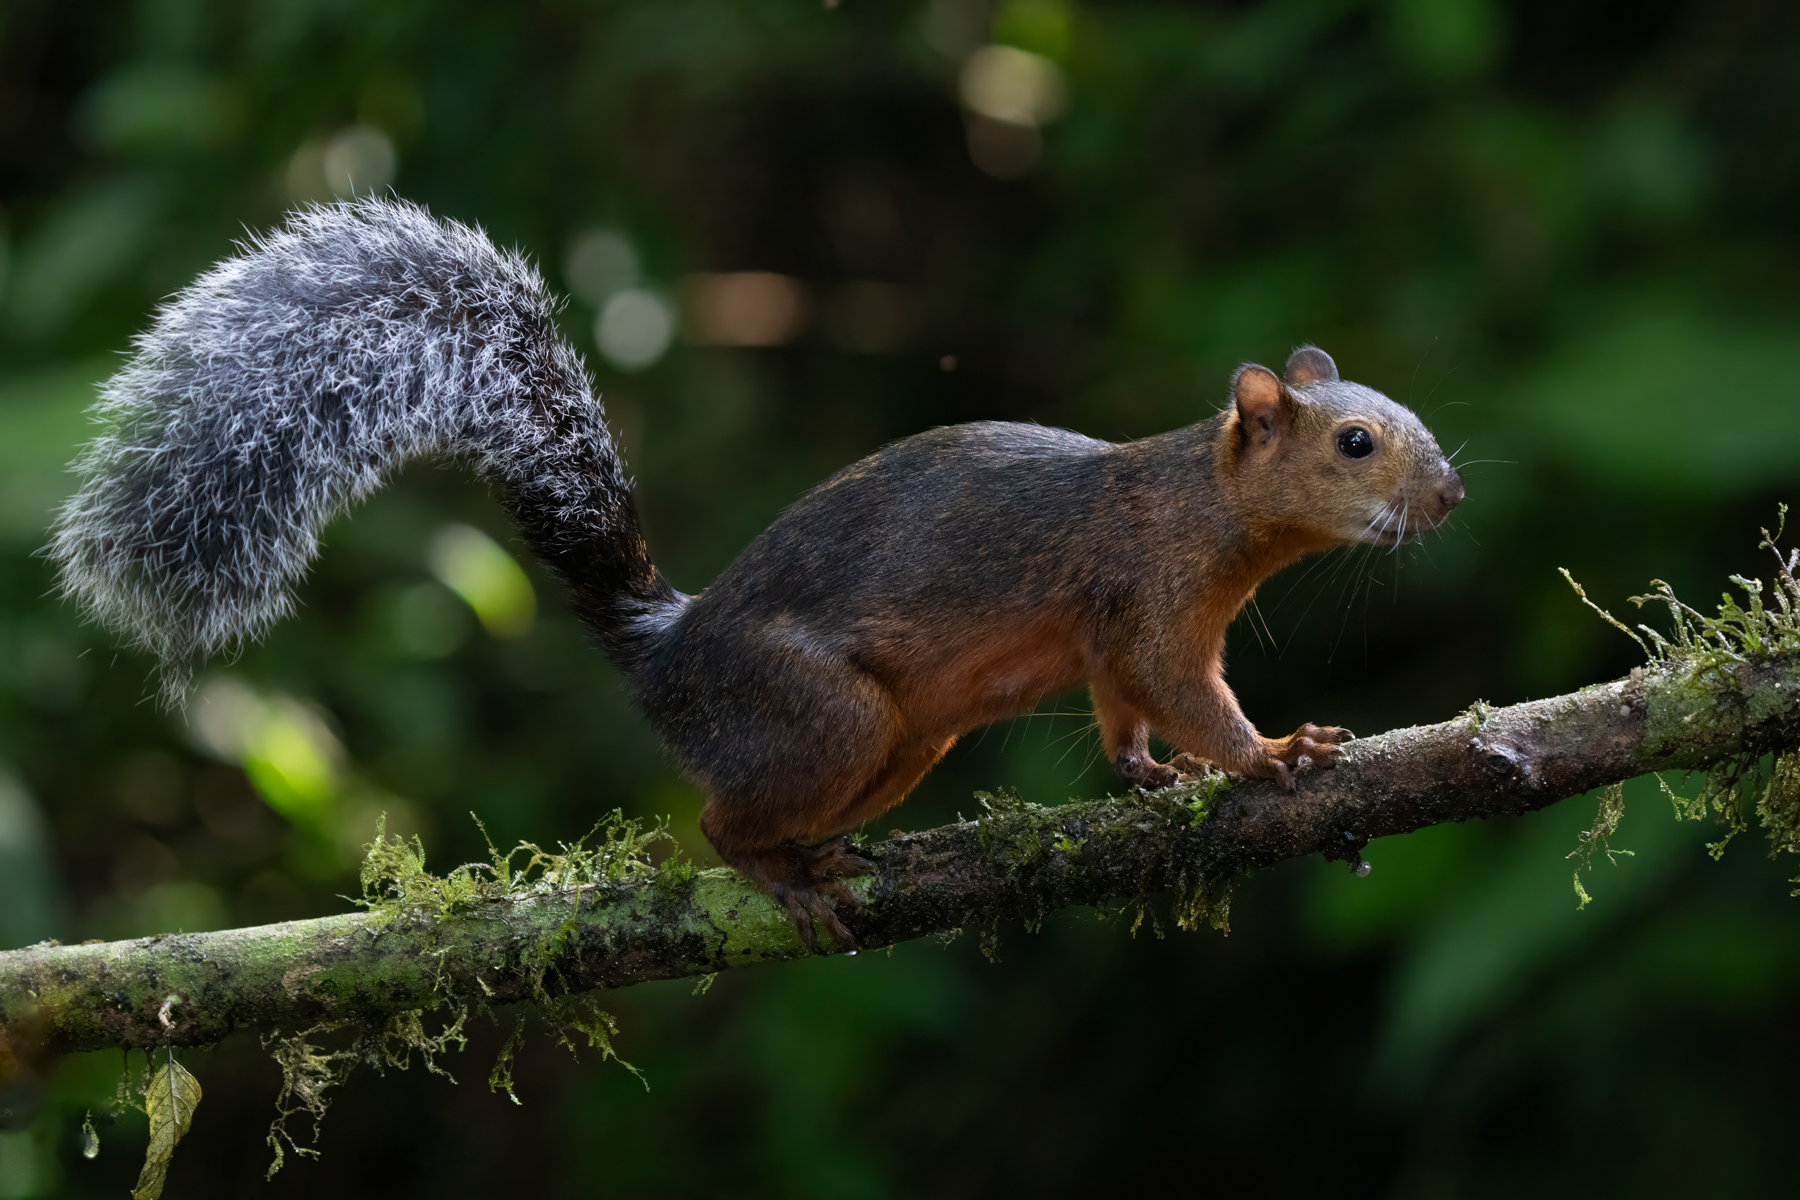 A Variegated Squirrel deep in the Costa Rican rainforest (image by Inger Vandyke)